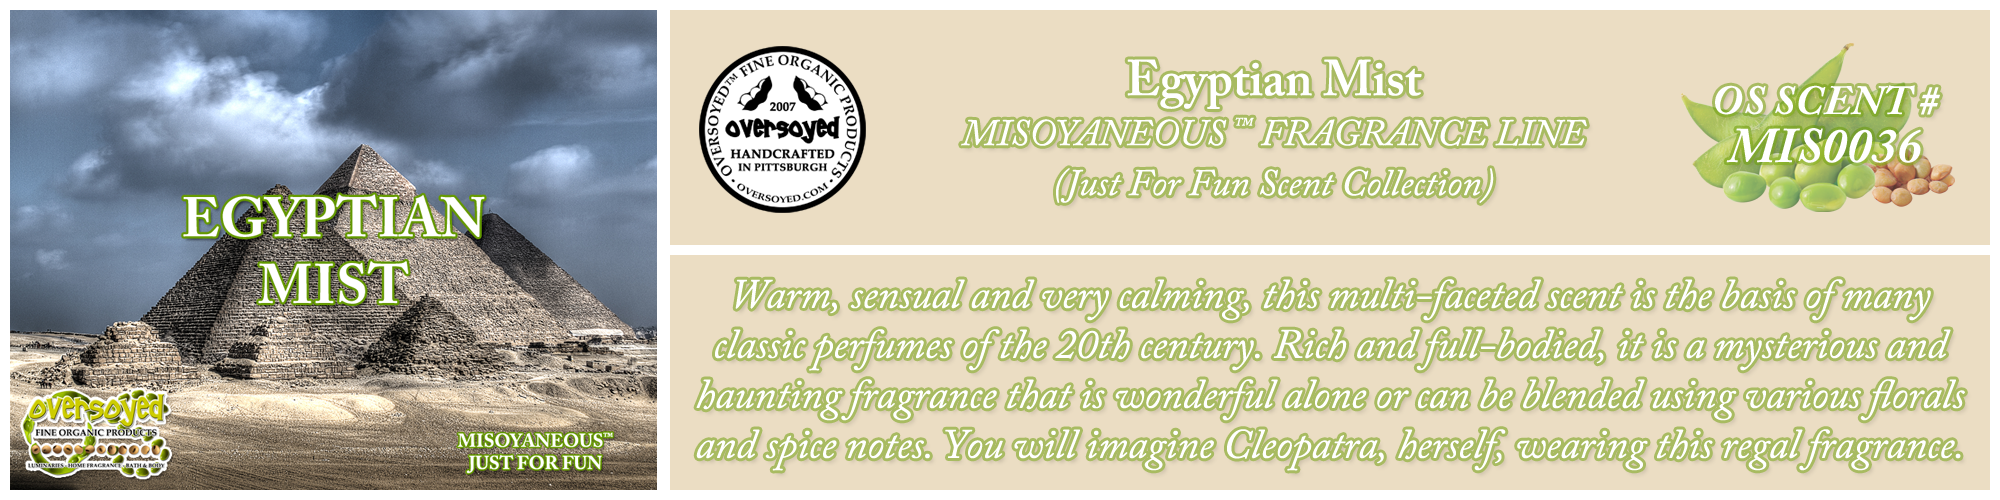 Egyptian Mist Handcrafted Products Collection